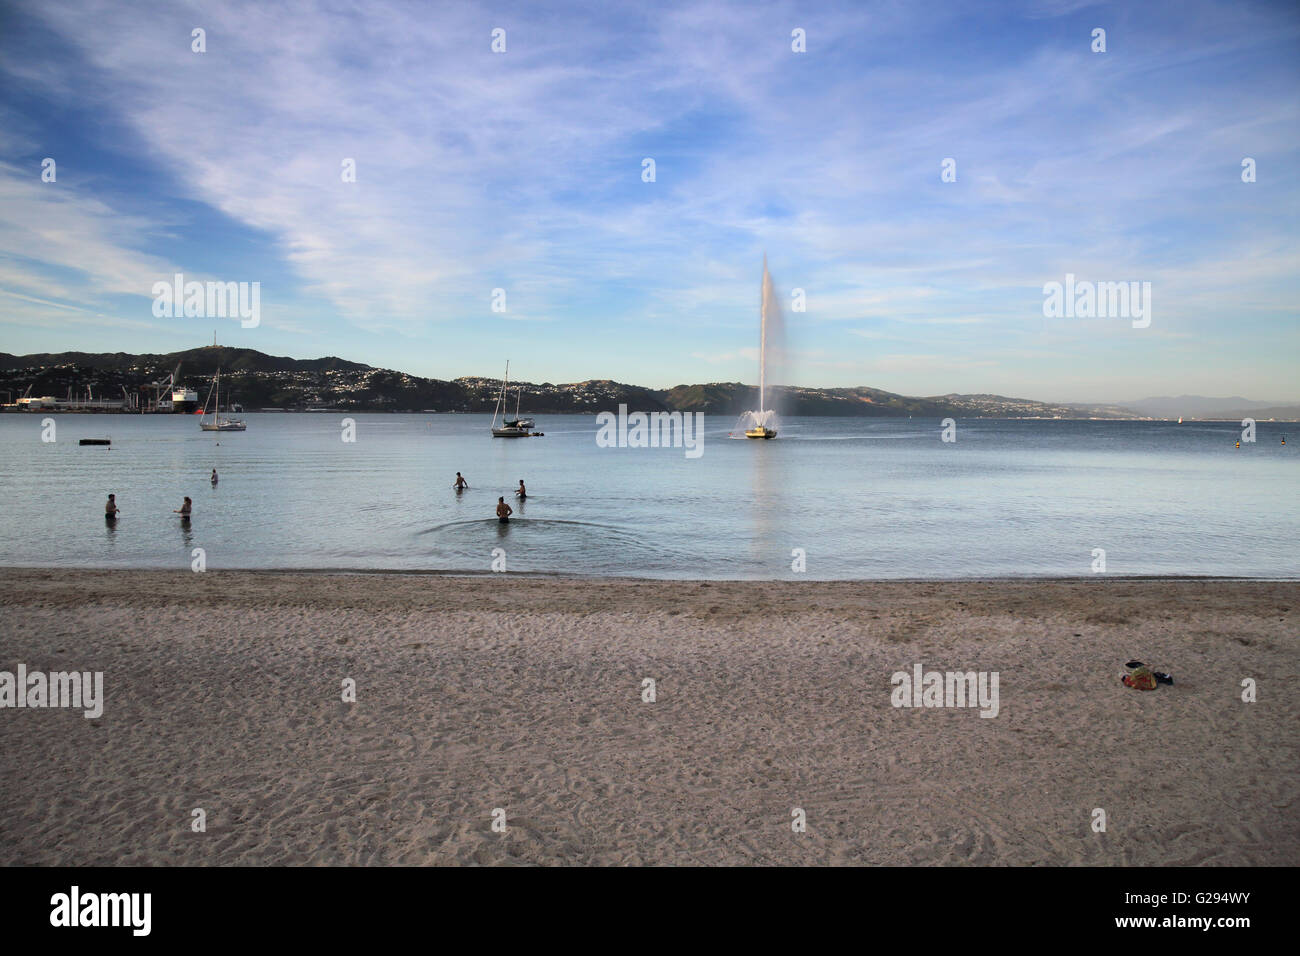 the carter fountain in wellington on the north island of new zealand Stock Photo